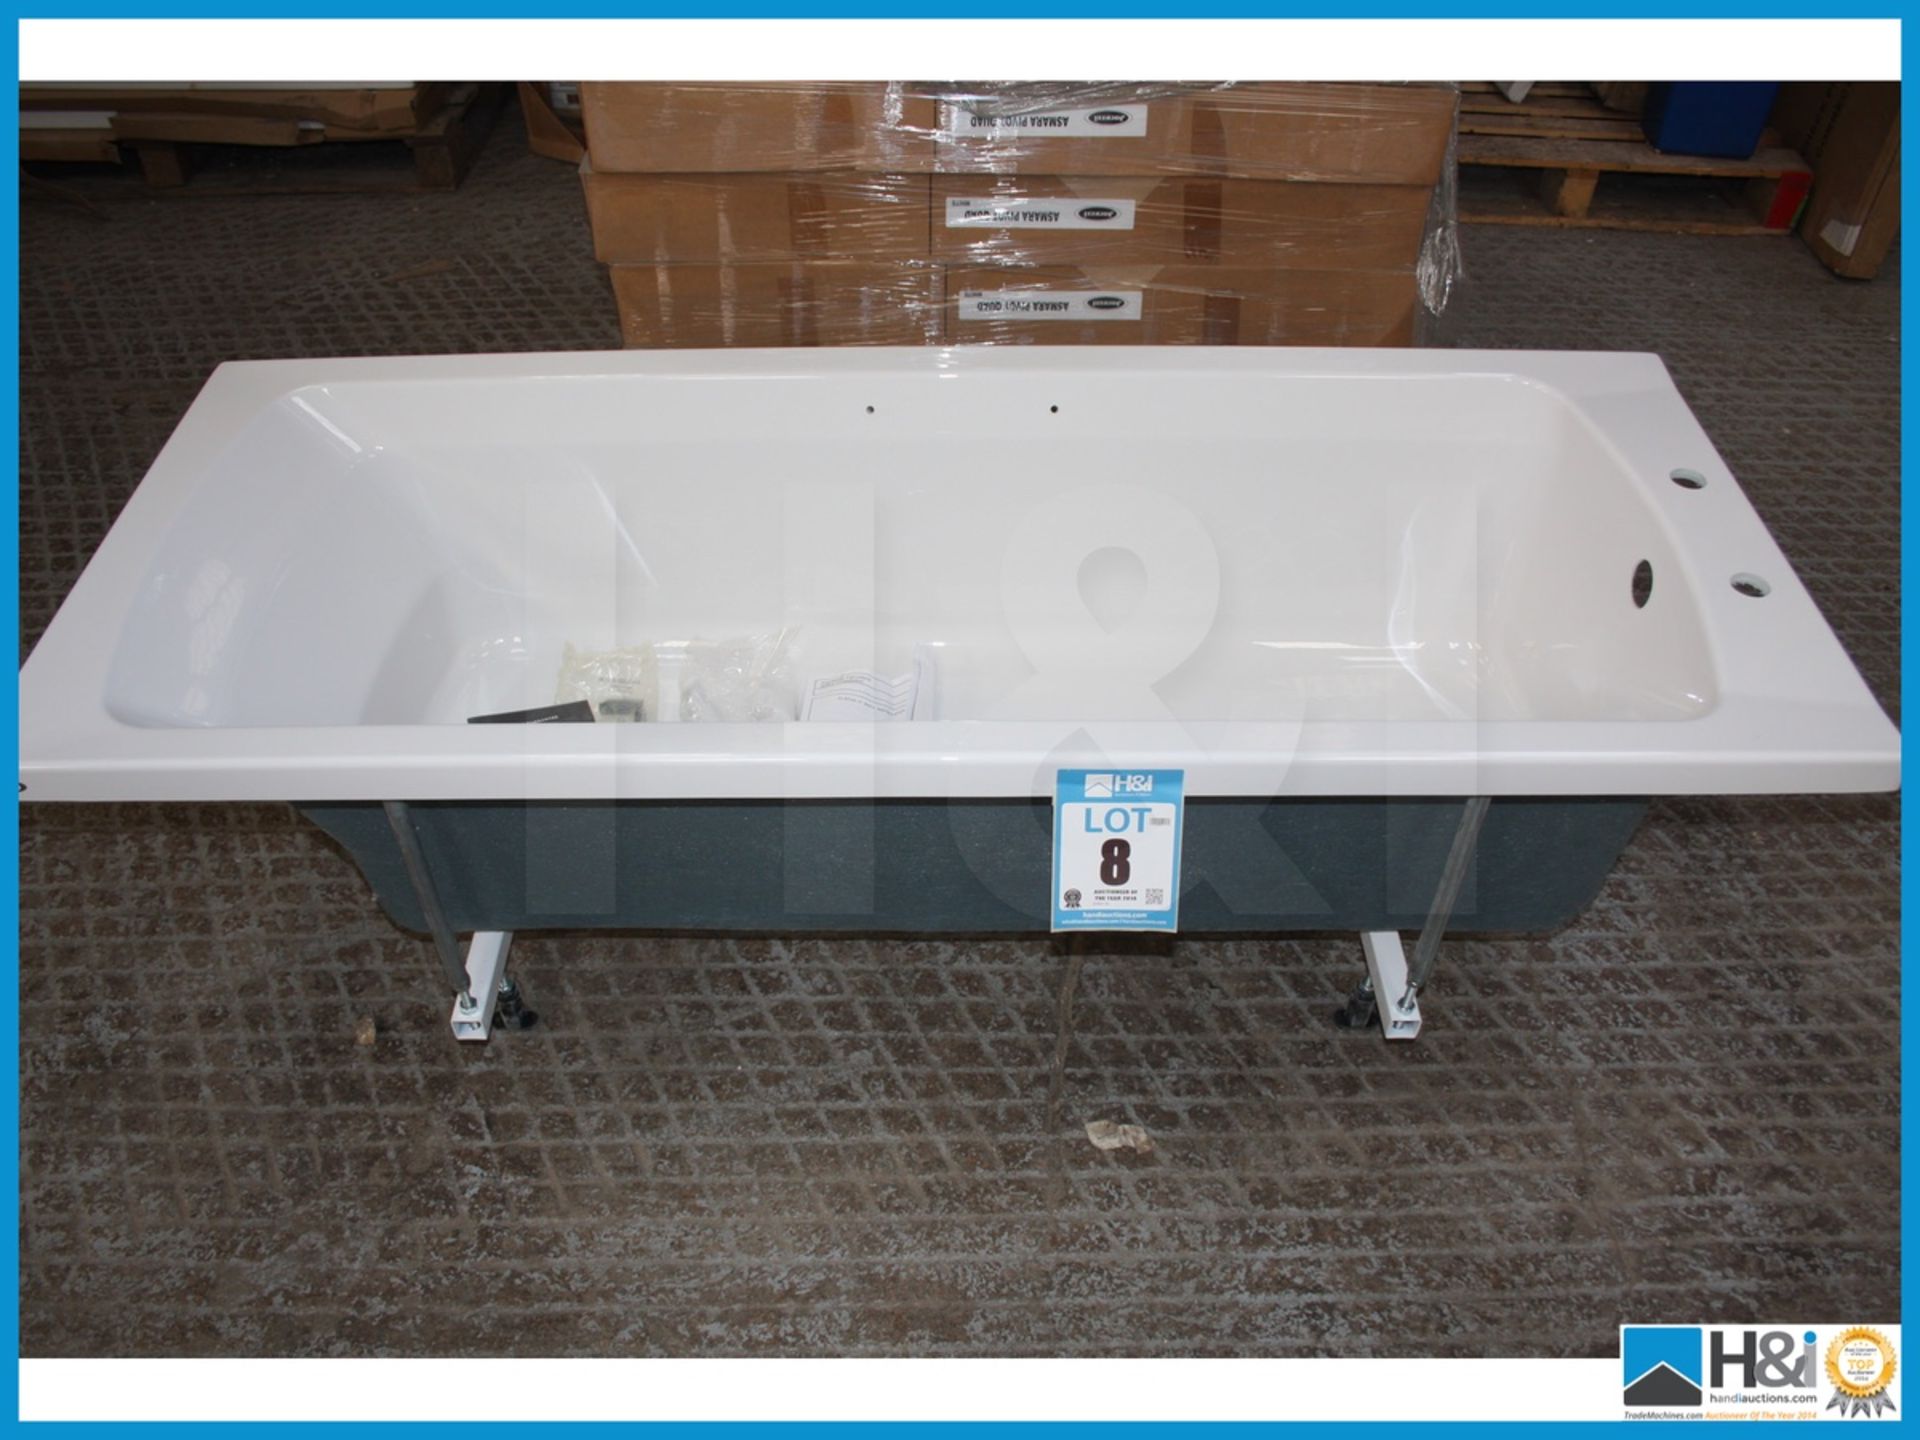 Jacuzzi elatus 1500 x 685 2 tap hole chrome grips new boxed rrp œ899 Appraisal: Viewing Essential